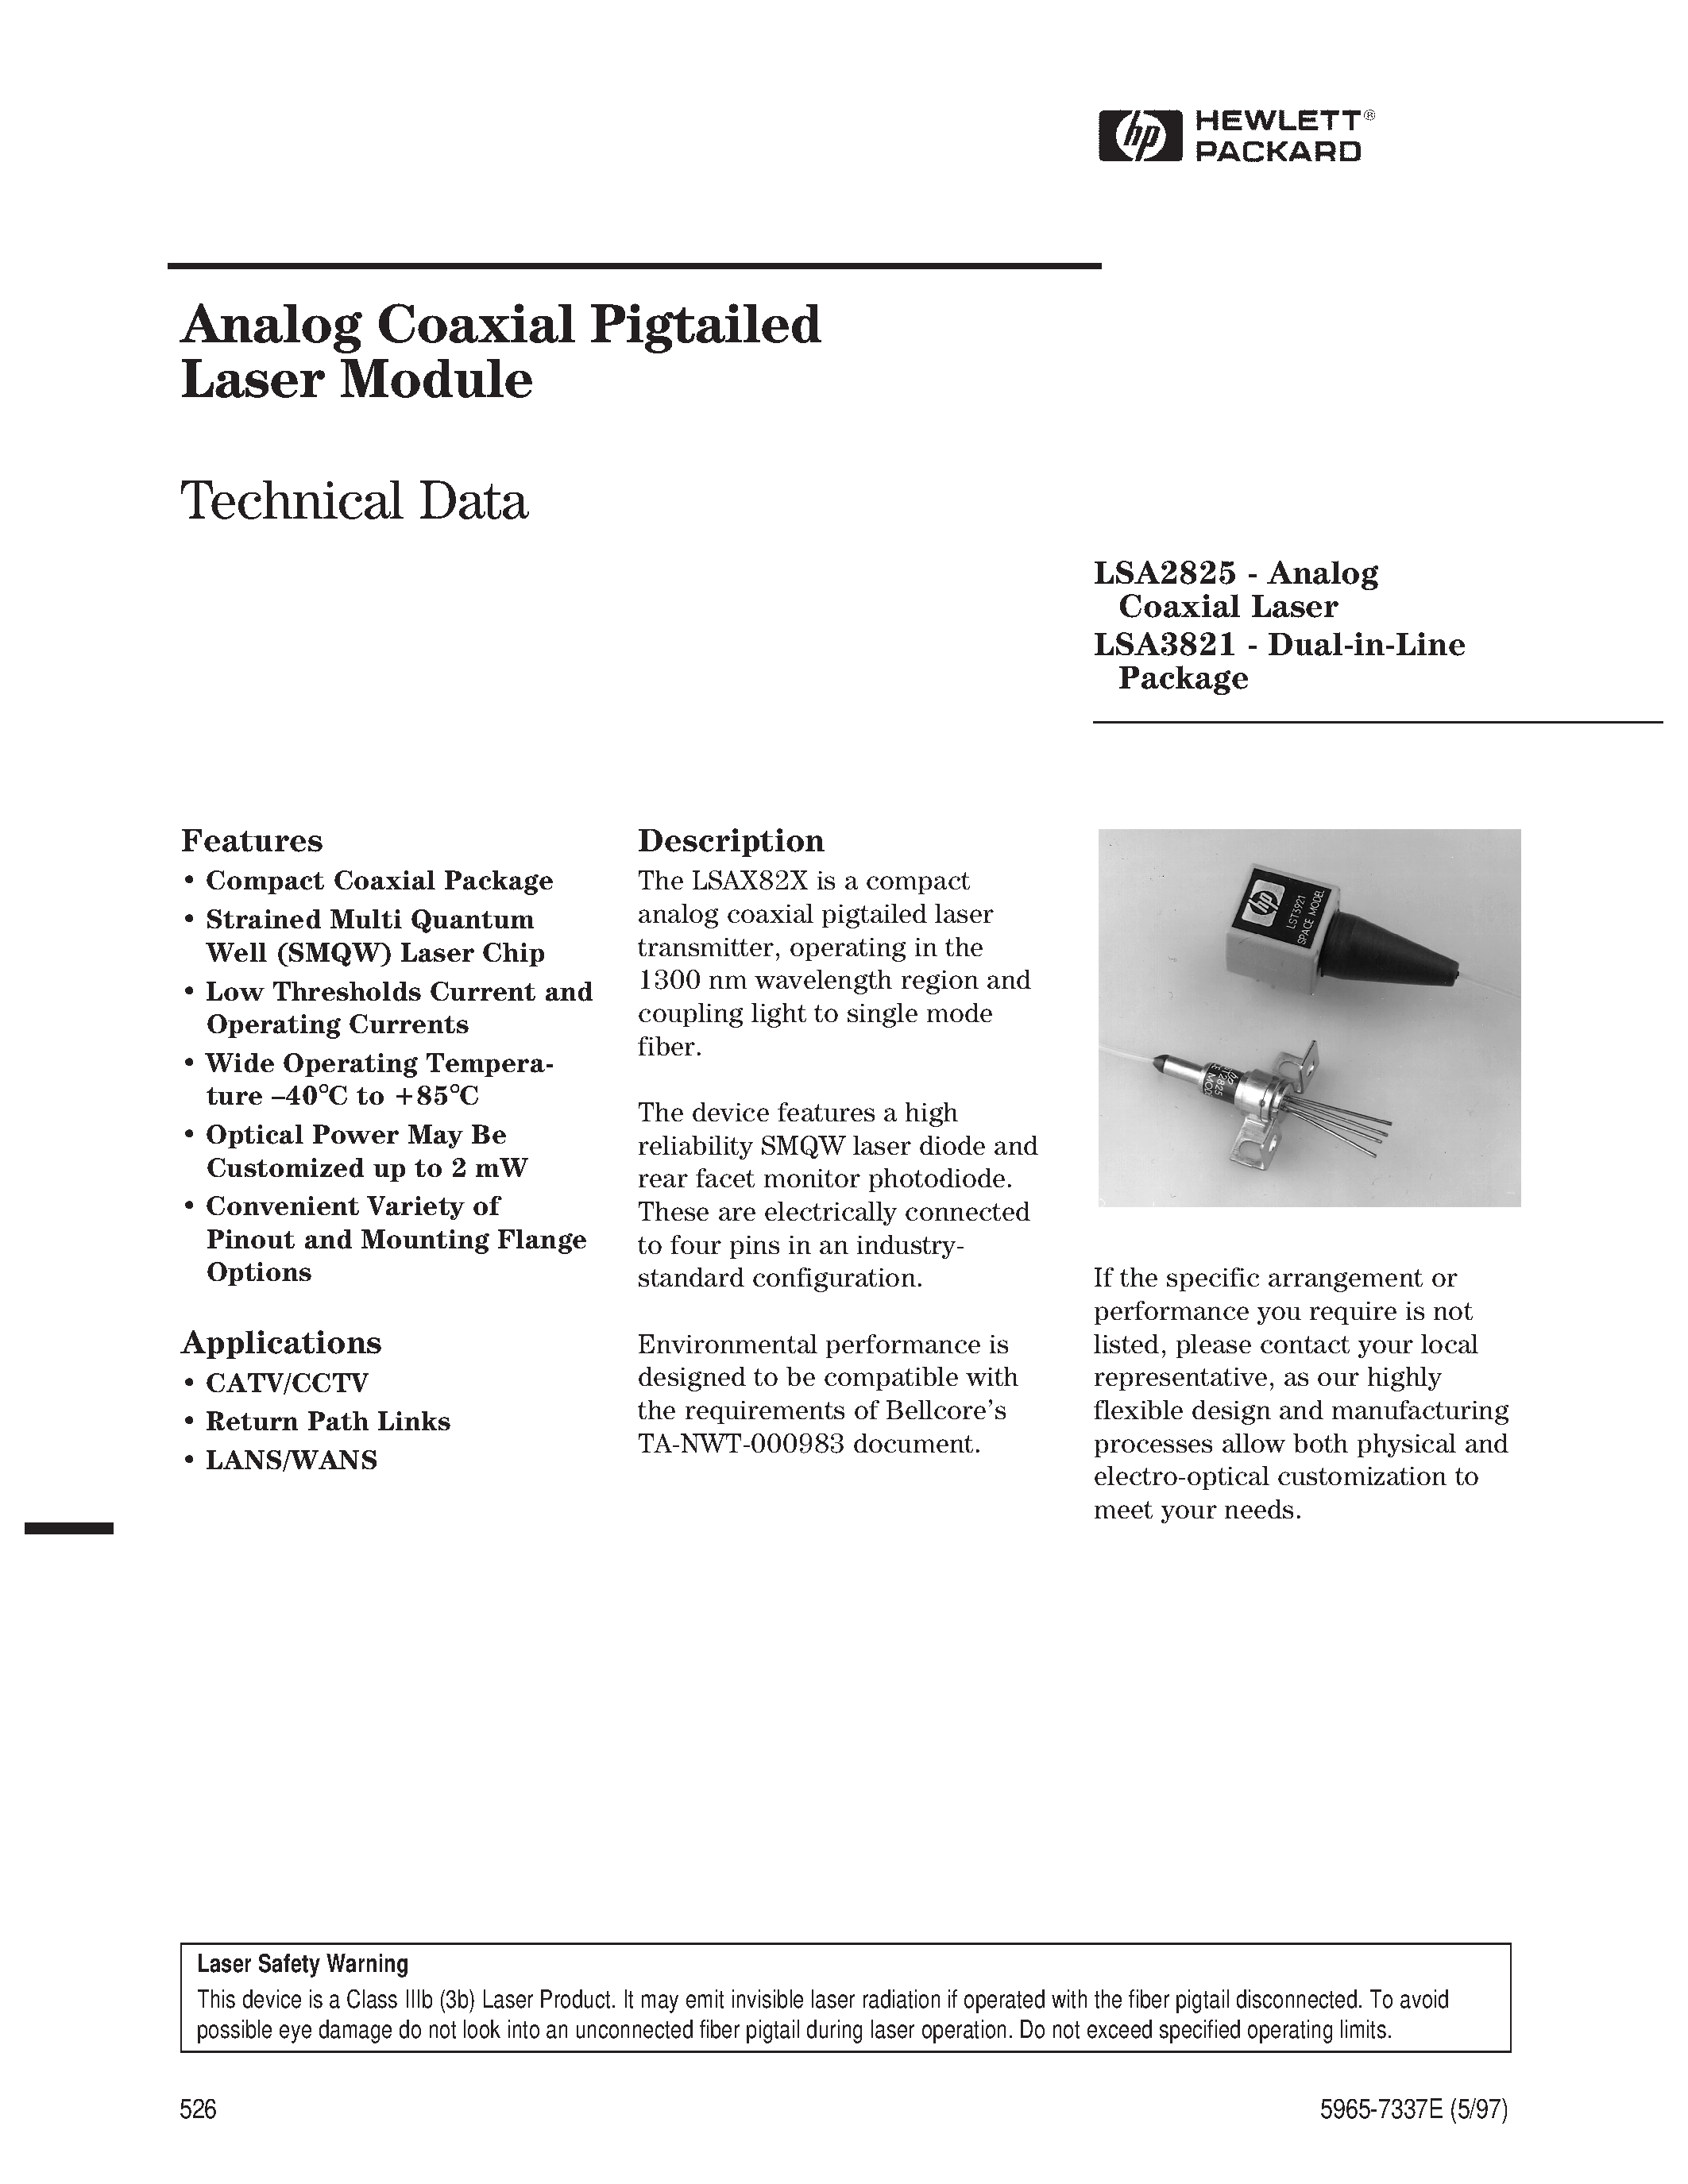 Datasheet LSA2825-T-AP - Analog Coaxial Pigtailed Laser Module page 1